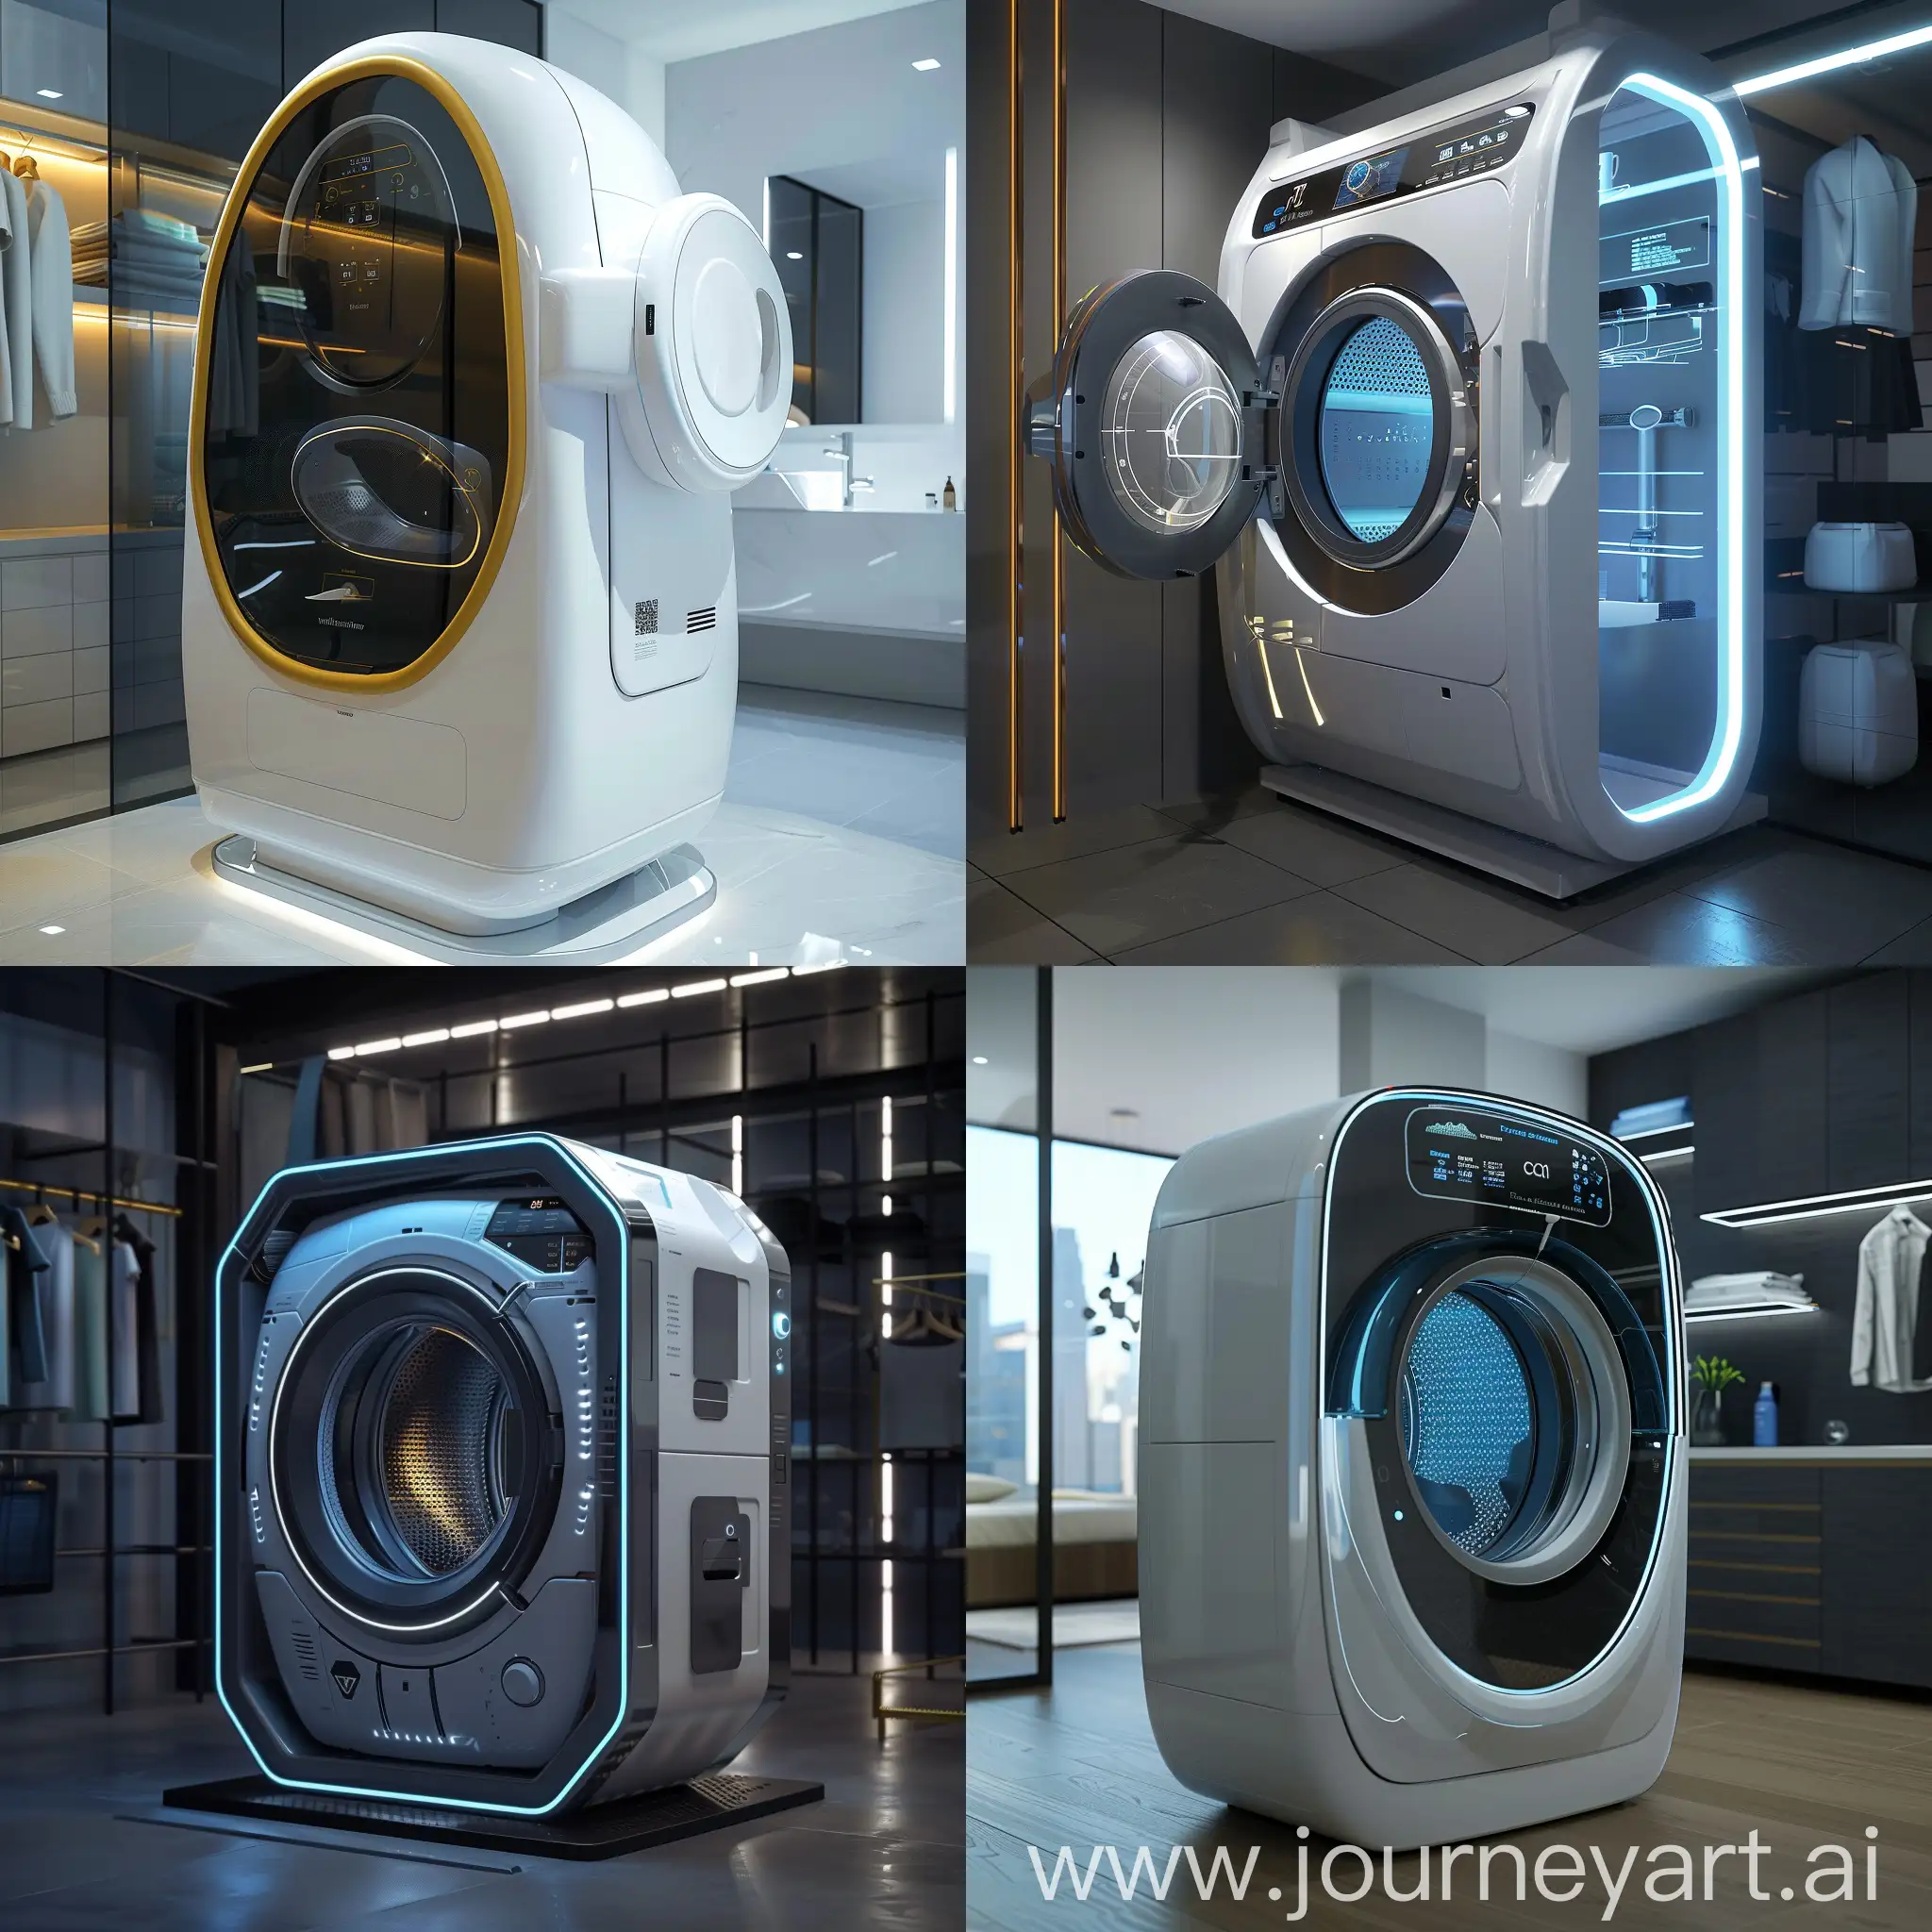 Futuristic-AIDriven-Washing-Machine-with-3D-Printed-Components-and-IoT-Connectivity